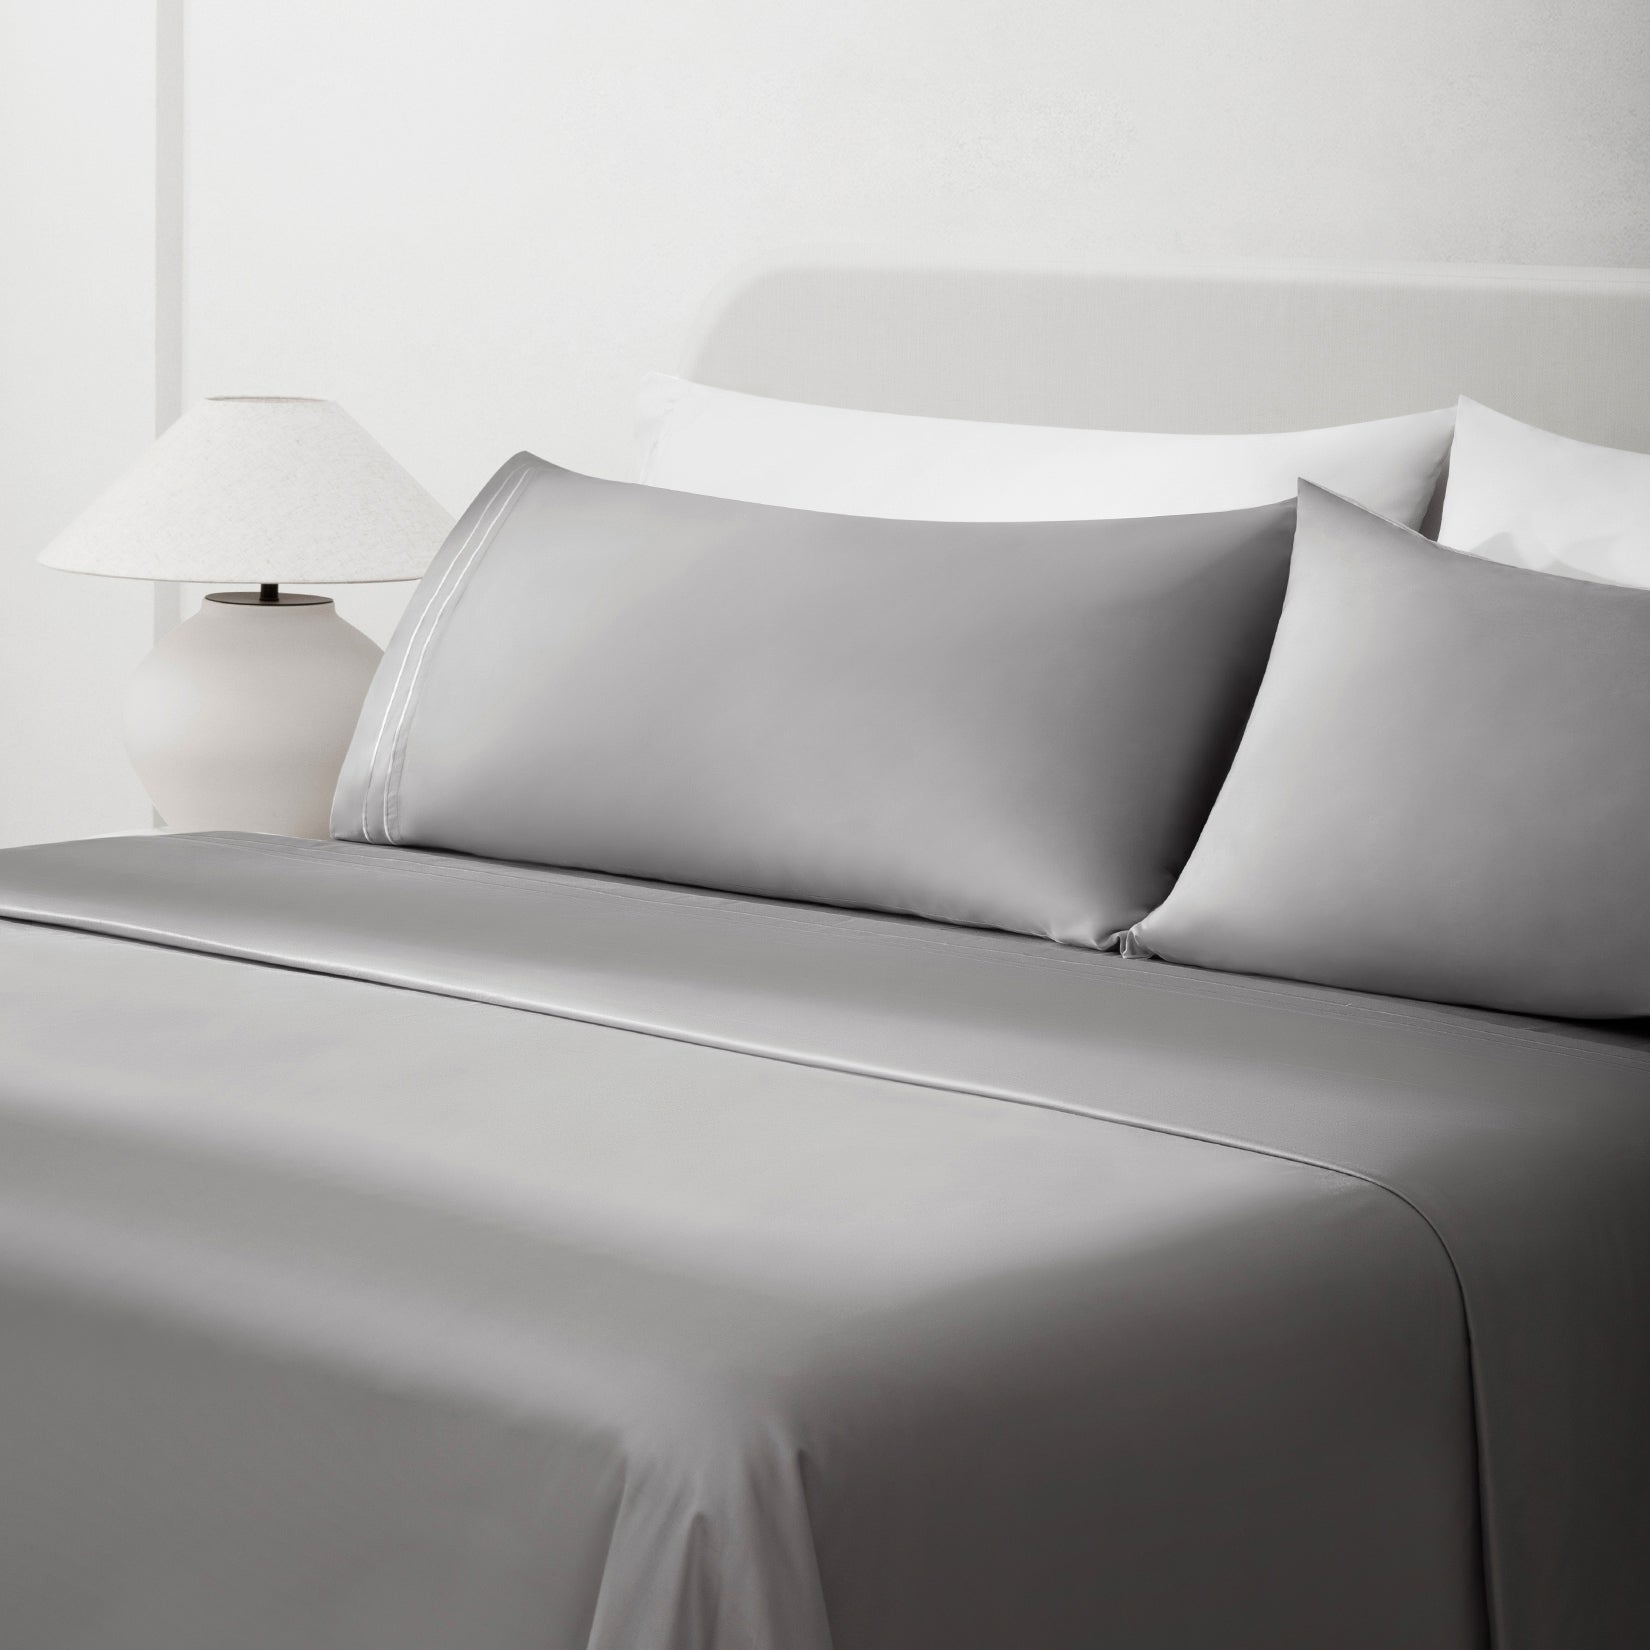 Sofia Foggy Gray Double Satin Stitched Cuff 300 thread count cotton bed sheet set. Gray pillows and gray cotton sheets on bed next to side table and lamp.